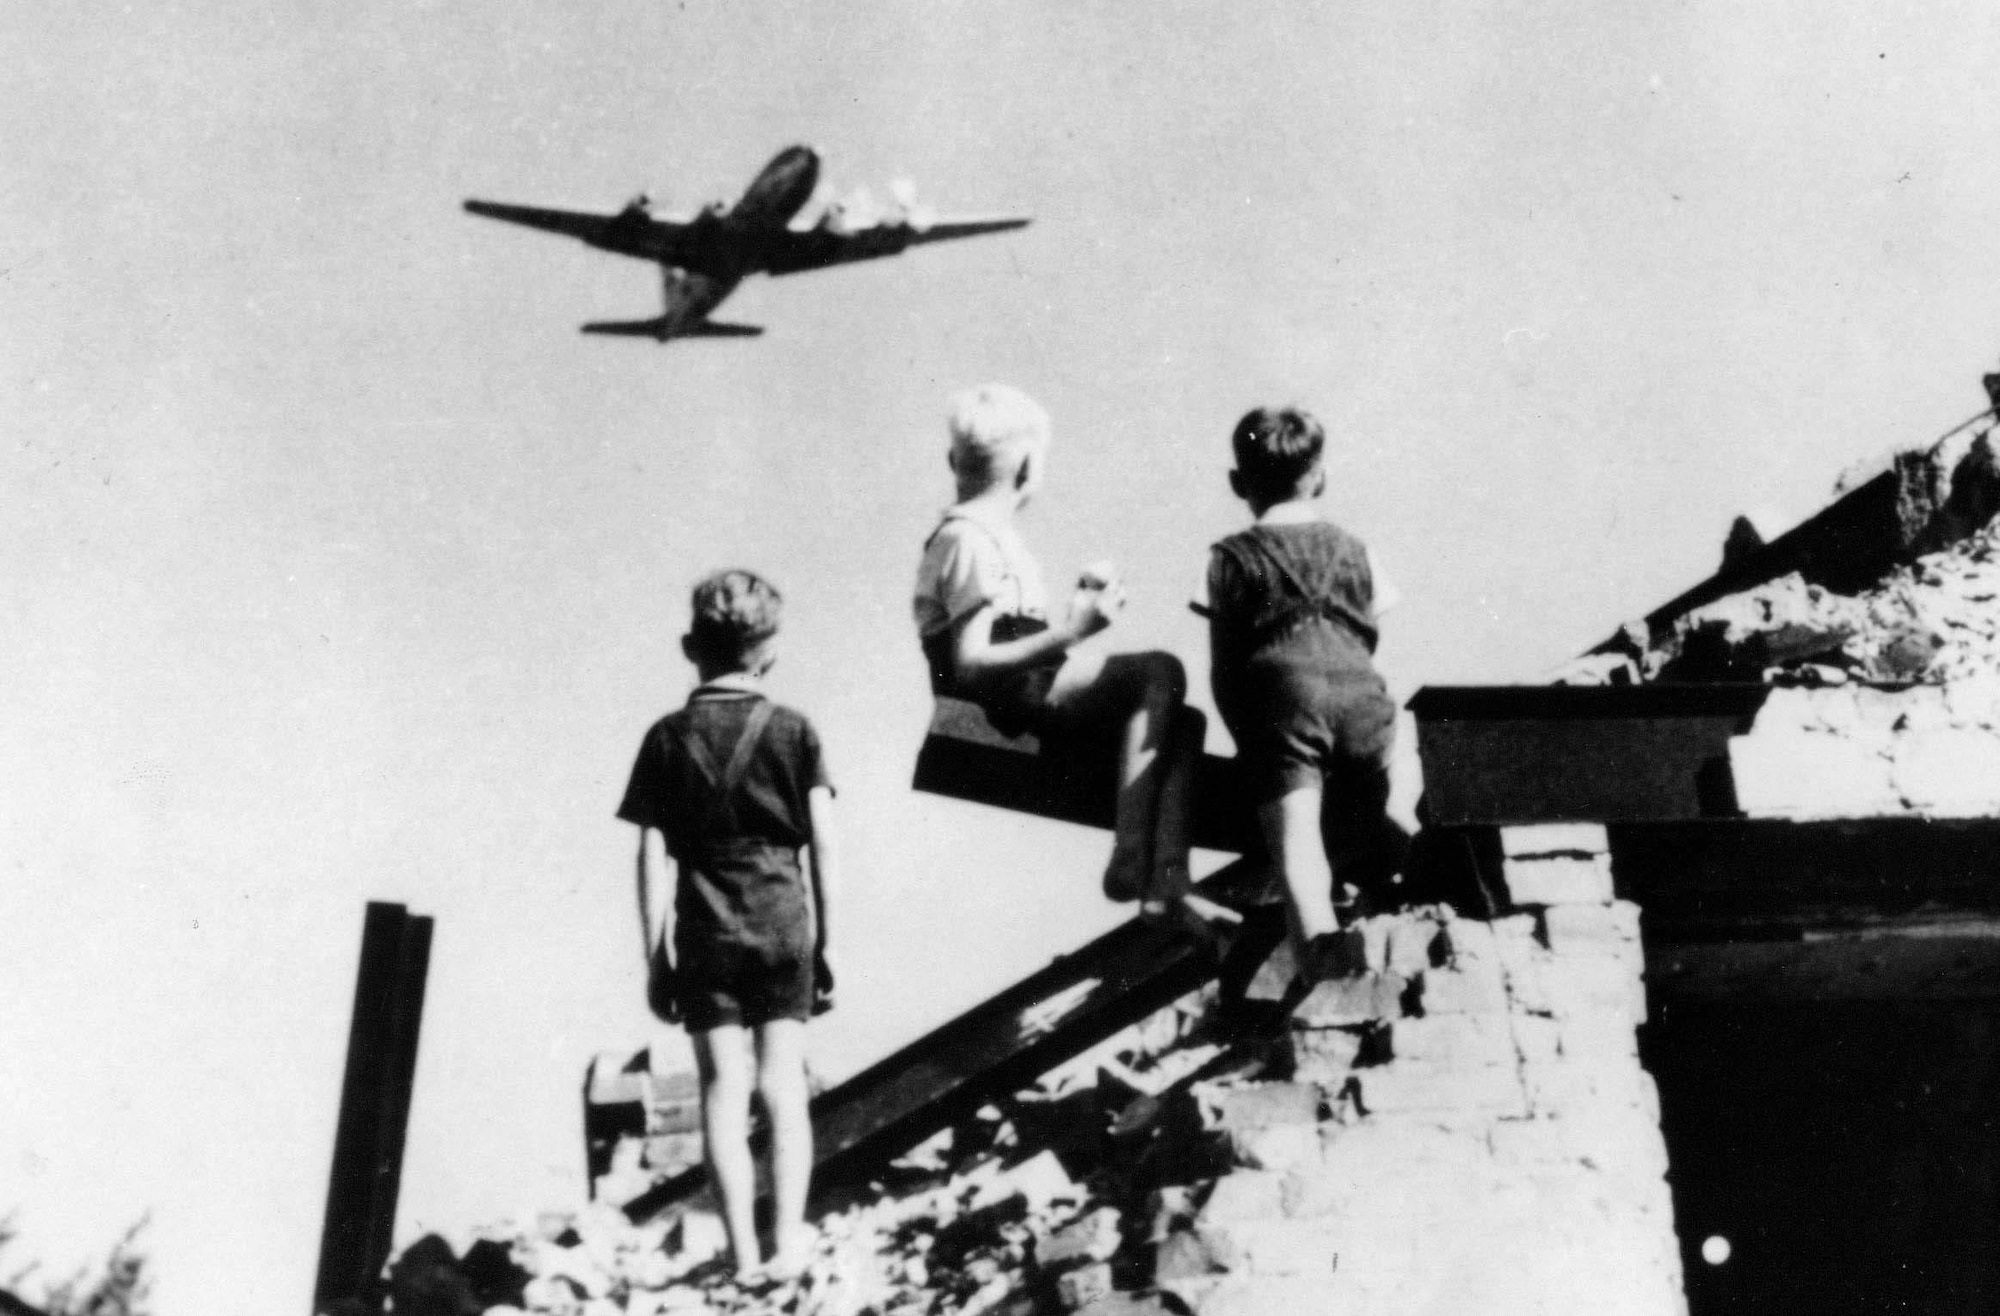 Children in West Berlin watch U.S. Air Force transport planes land at Templehof Airport during the Berlin Airlift in 1948. During the height of the operation, an aircraft landed every thirty seconds in West Berlin. The USAF delivered 1,783,573 tons and the RAF 541,937, on a total of 278,228 flights from June, 1948 to May, 1949. (U.S. Air Force photo)